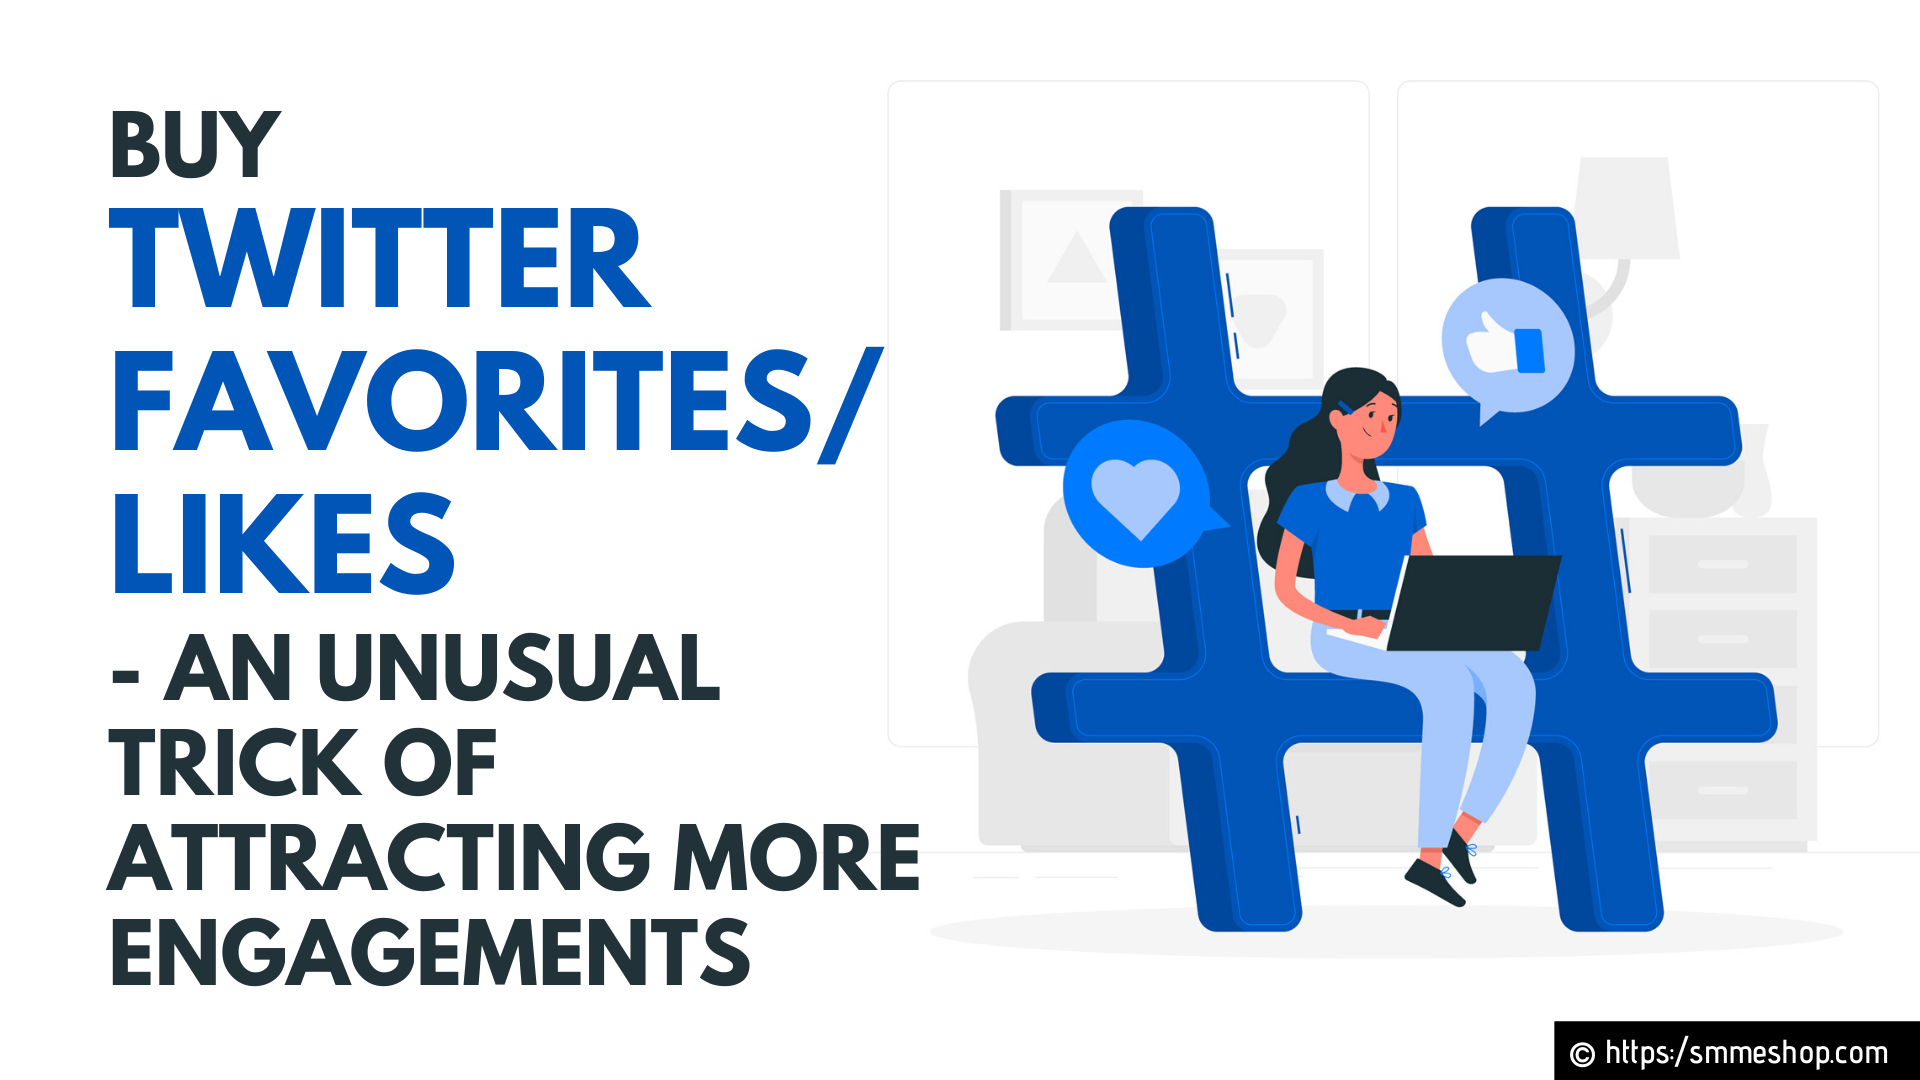 Buy Twitter Favorites/Likes - An Unusual Trick of Attracting More Engagements